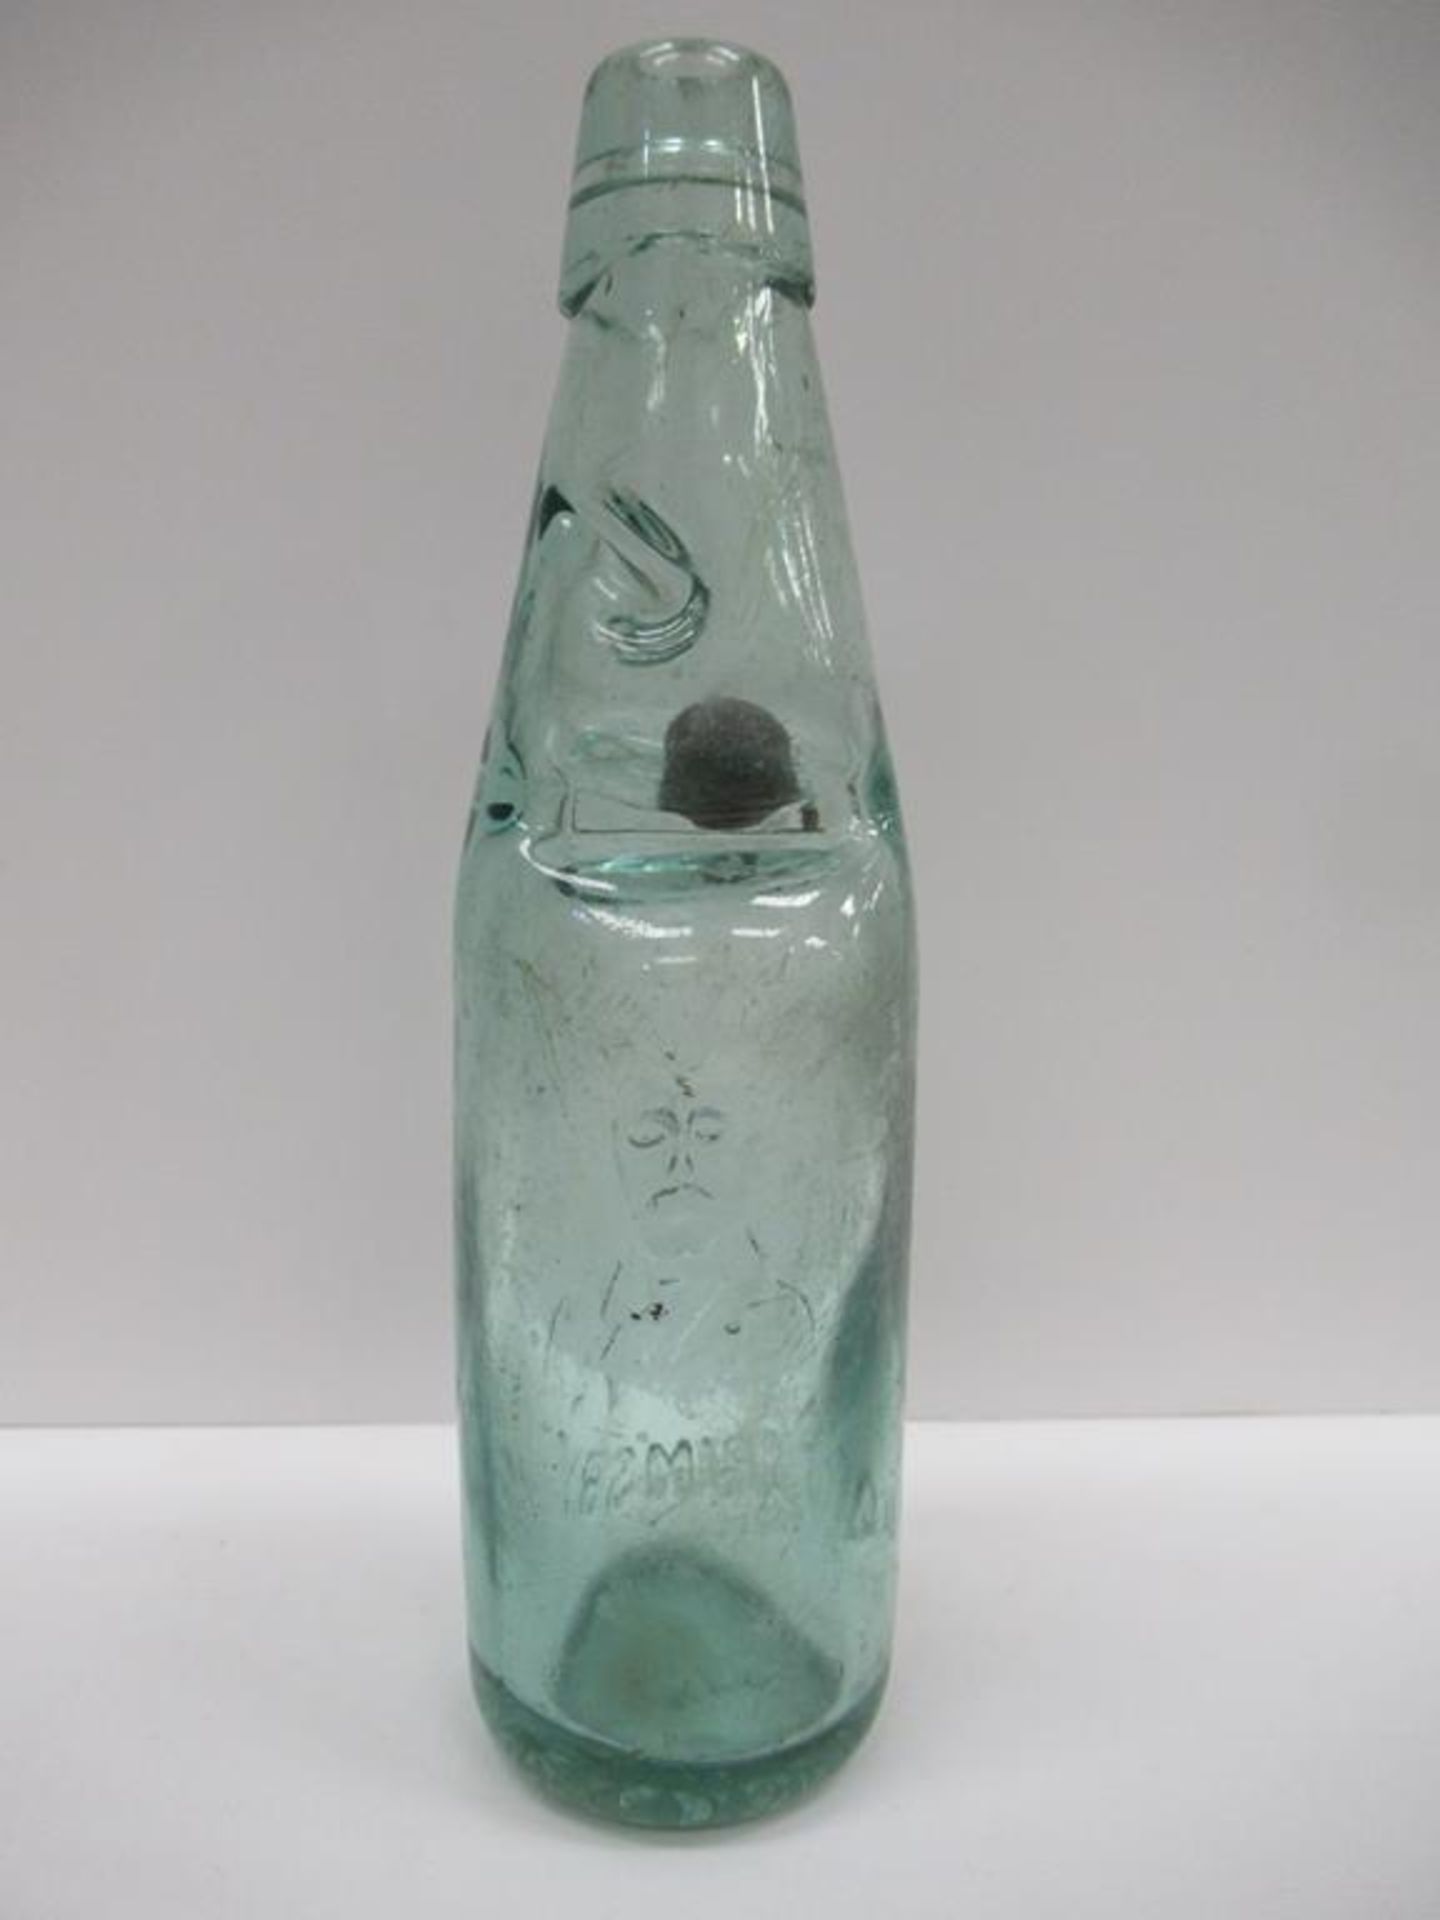 Grimsby Reinecke's Aerated Waters codd bottle with coloured marble 10oz - Image 3 of 9